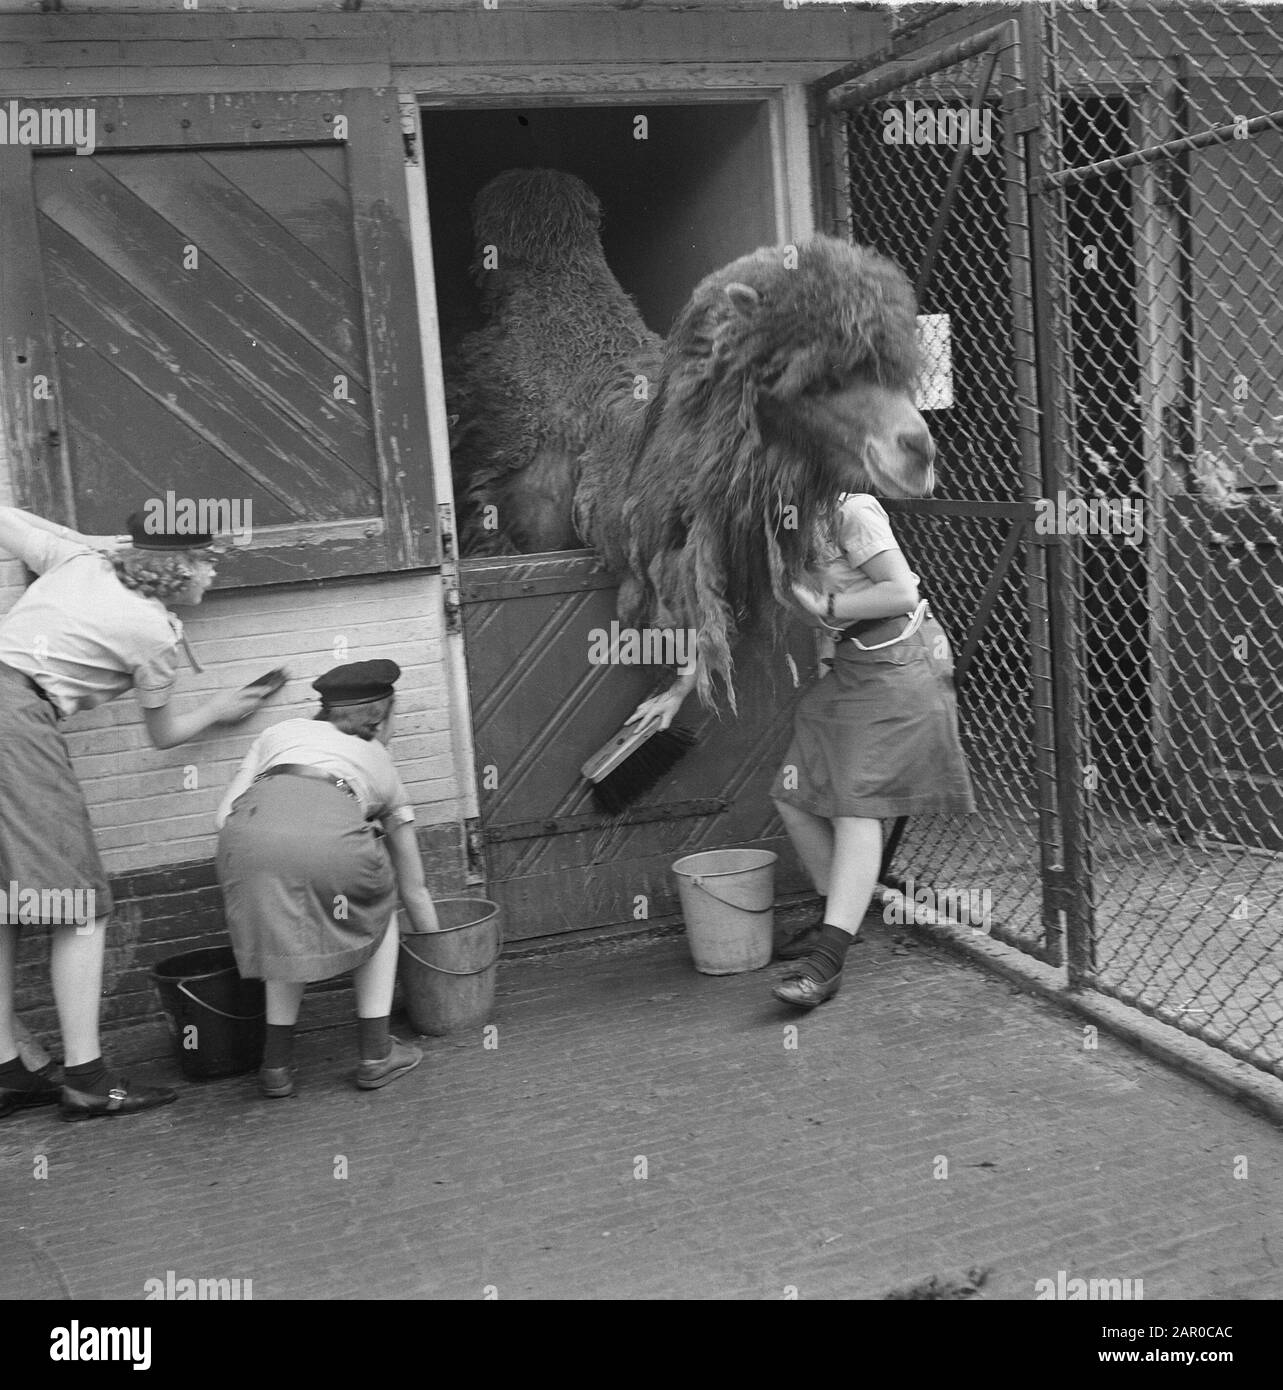 Heitty for a chore, Boy Scouts clean the night places of Artis. The stay of a camel Date: 18 april 1963 Location: Amsterdam, Noord-Holland Keywords: zoos, camels, boy scout Institution name: Artis Stock Photo